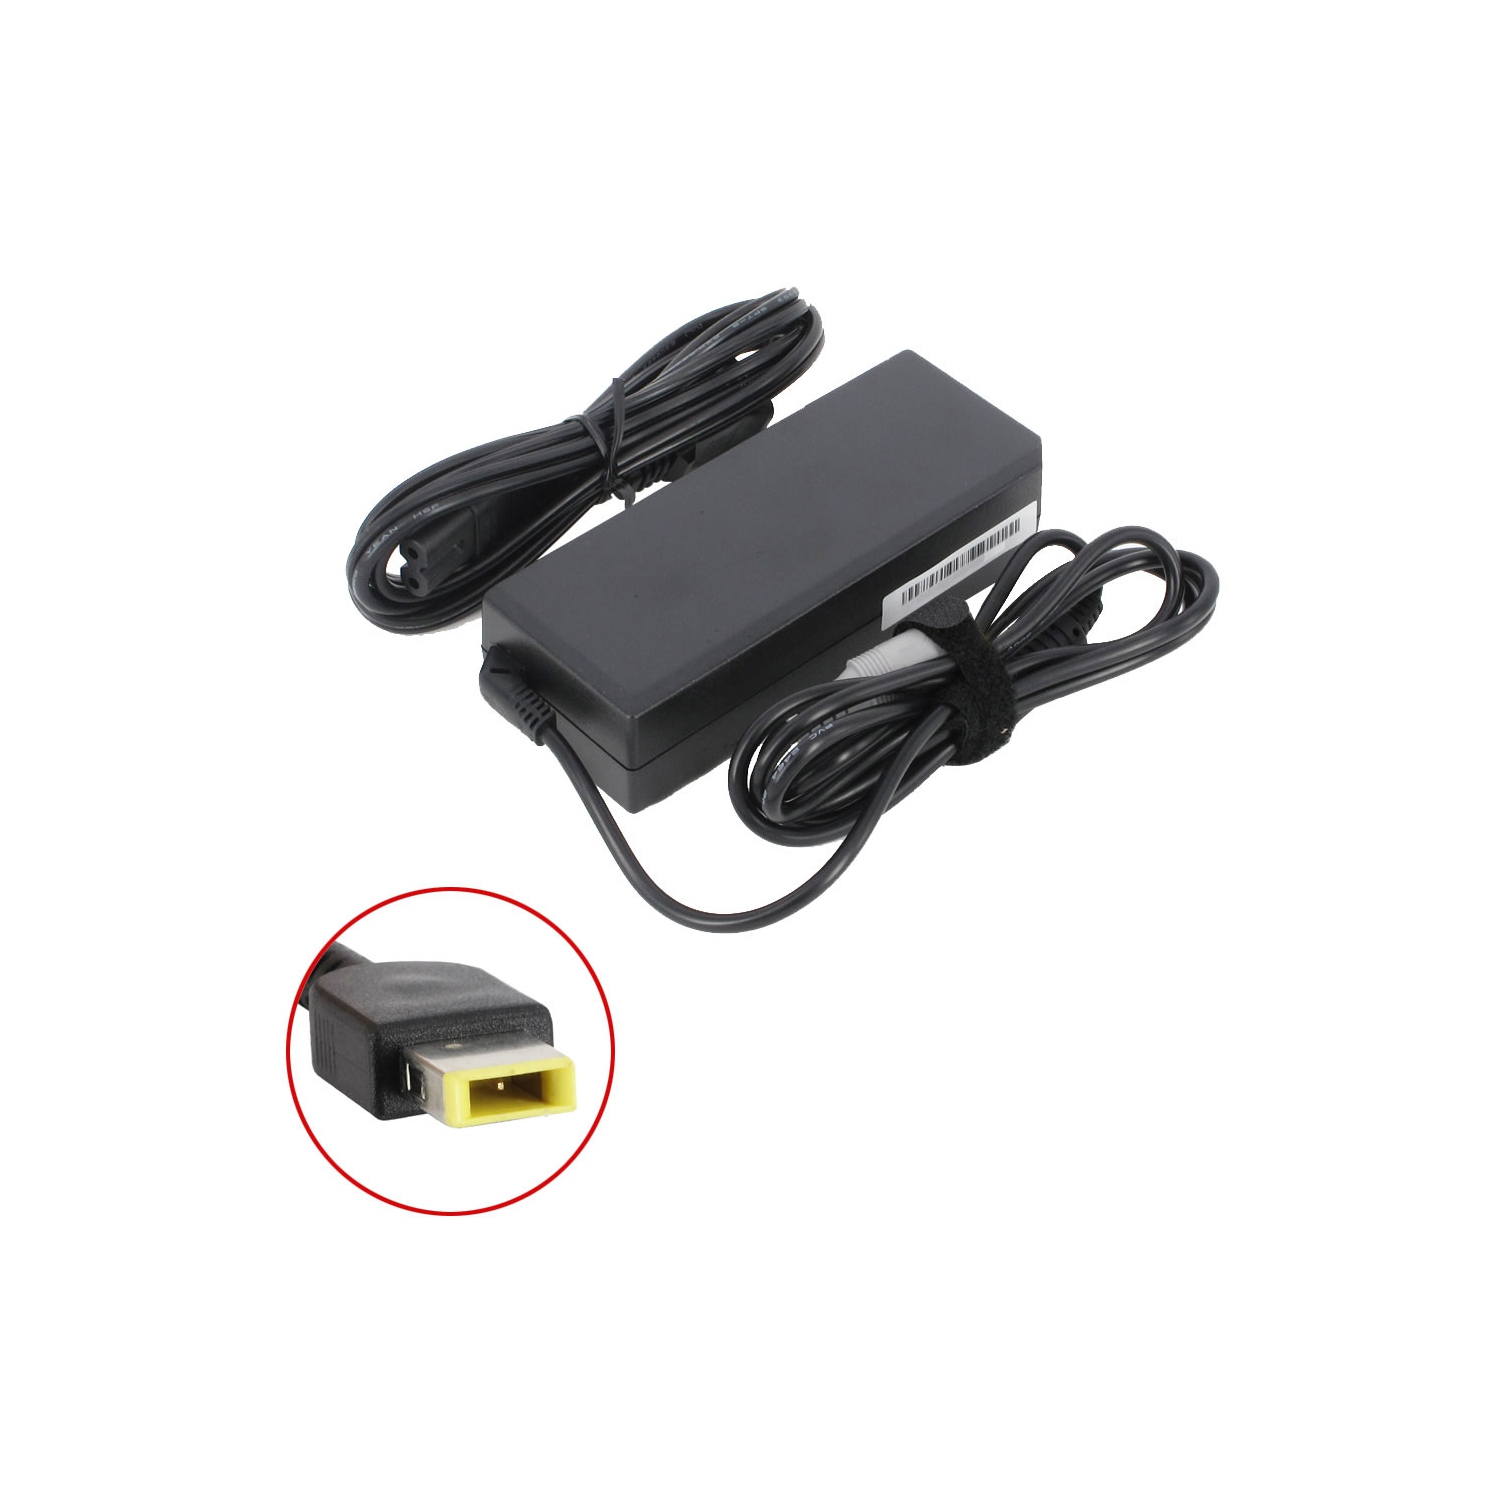 Brand New Laptop AC Adapter for Lenovo Ideapad 300-14ISK, 0B47455, 45N0247, ADLX45NDC3A, ADLX65NLC3A, 36200235